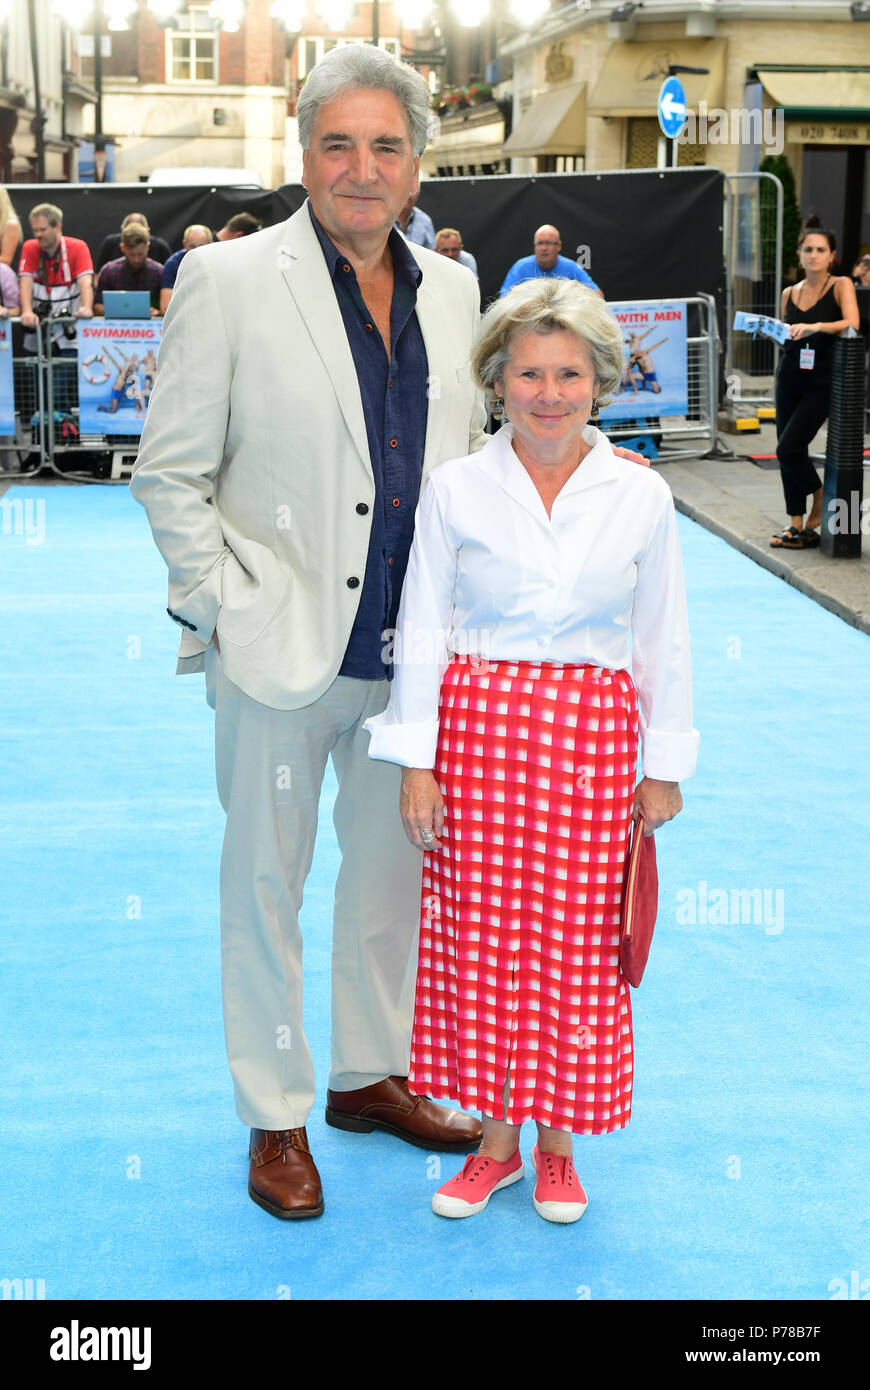 Jim Carter and Imelda Staunton attending the Swimming with Men premiere ...